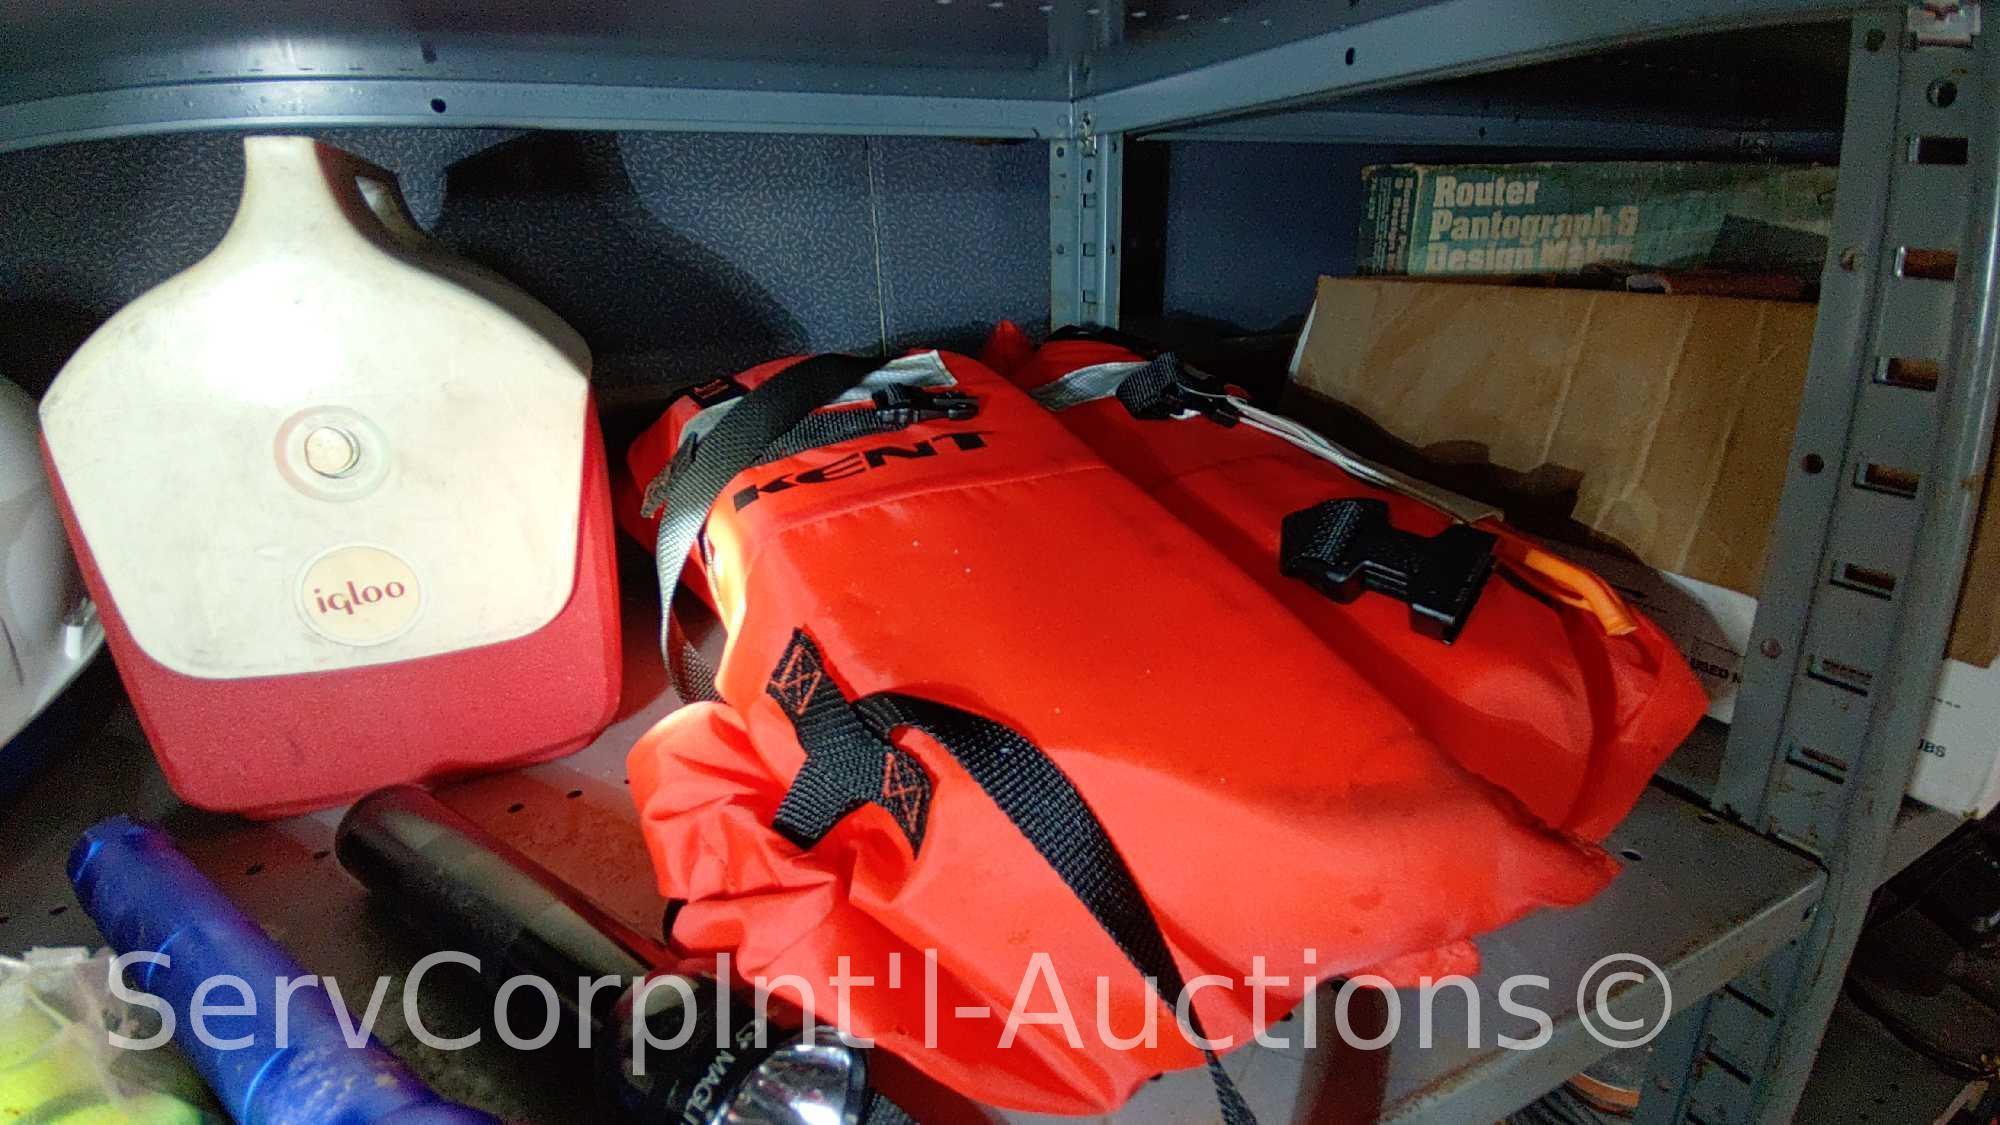 Lot on 2 Shelves of Hard Hats, Small Ice Chest, Life Jacket, Water Pump/Timing Kit (Unknown